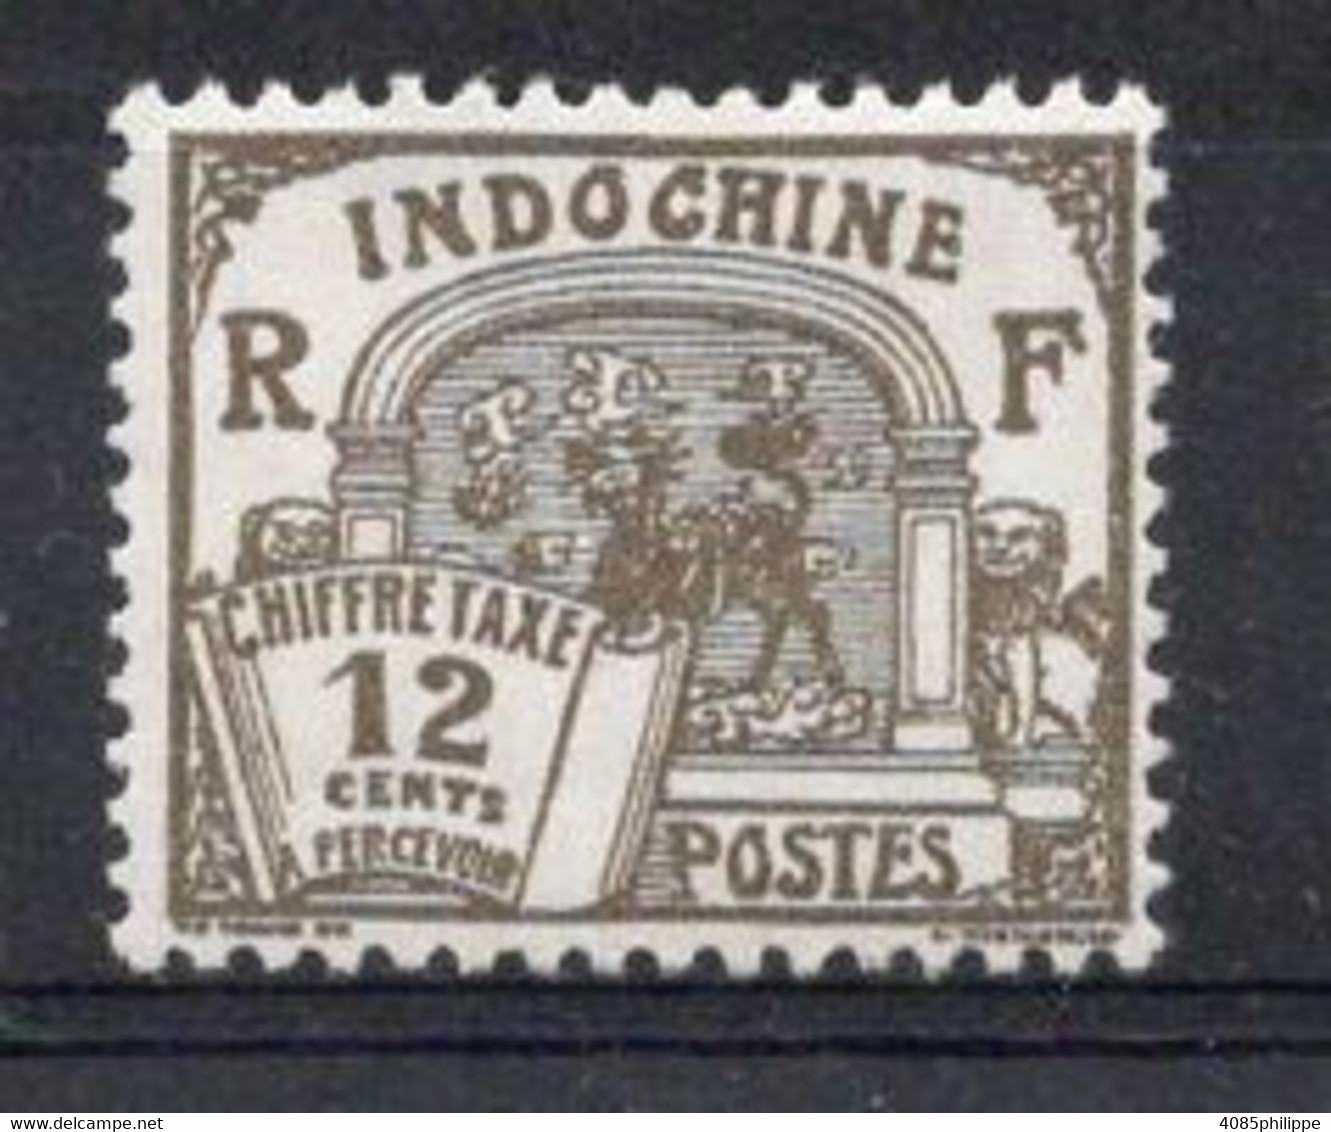 INDOCHINE Timbre Taxe N°53* Neuf Gomme Tachée Cote 7€00 - Impuestos